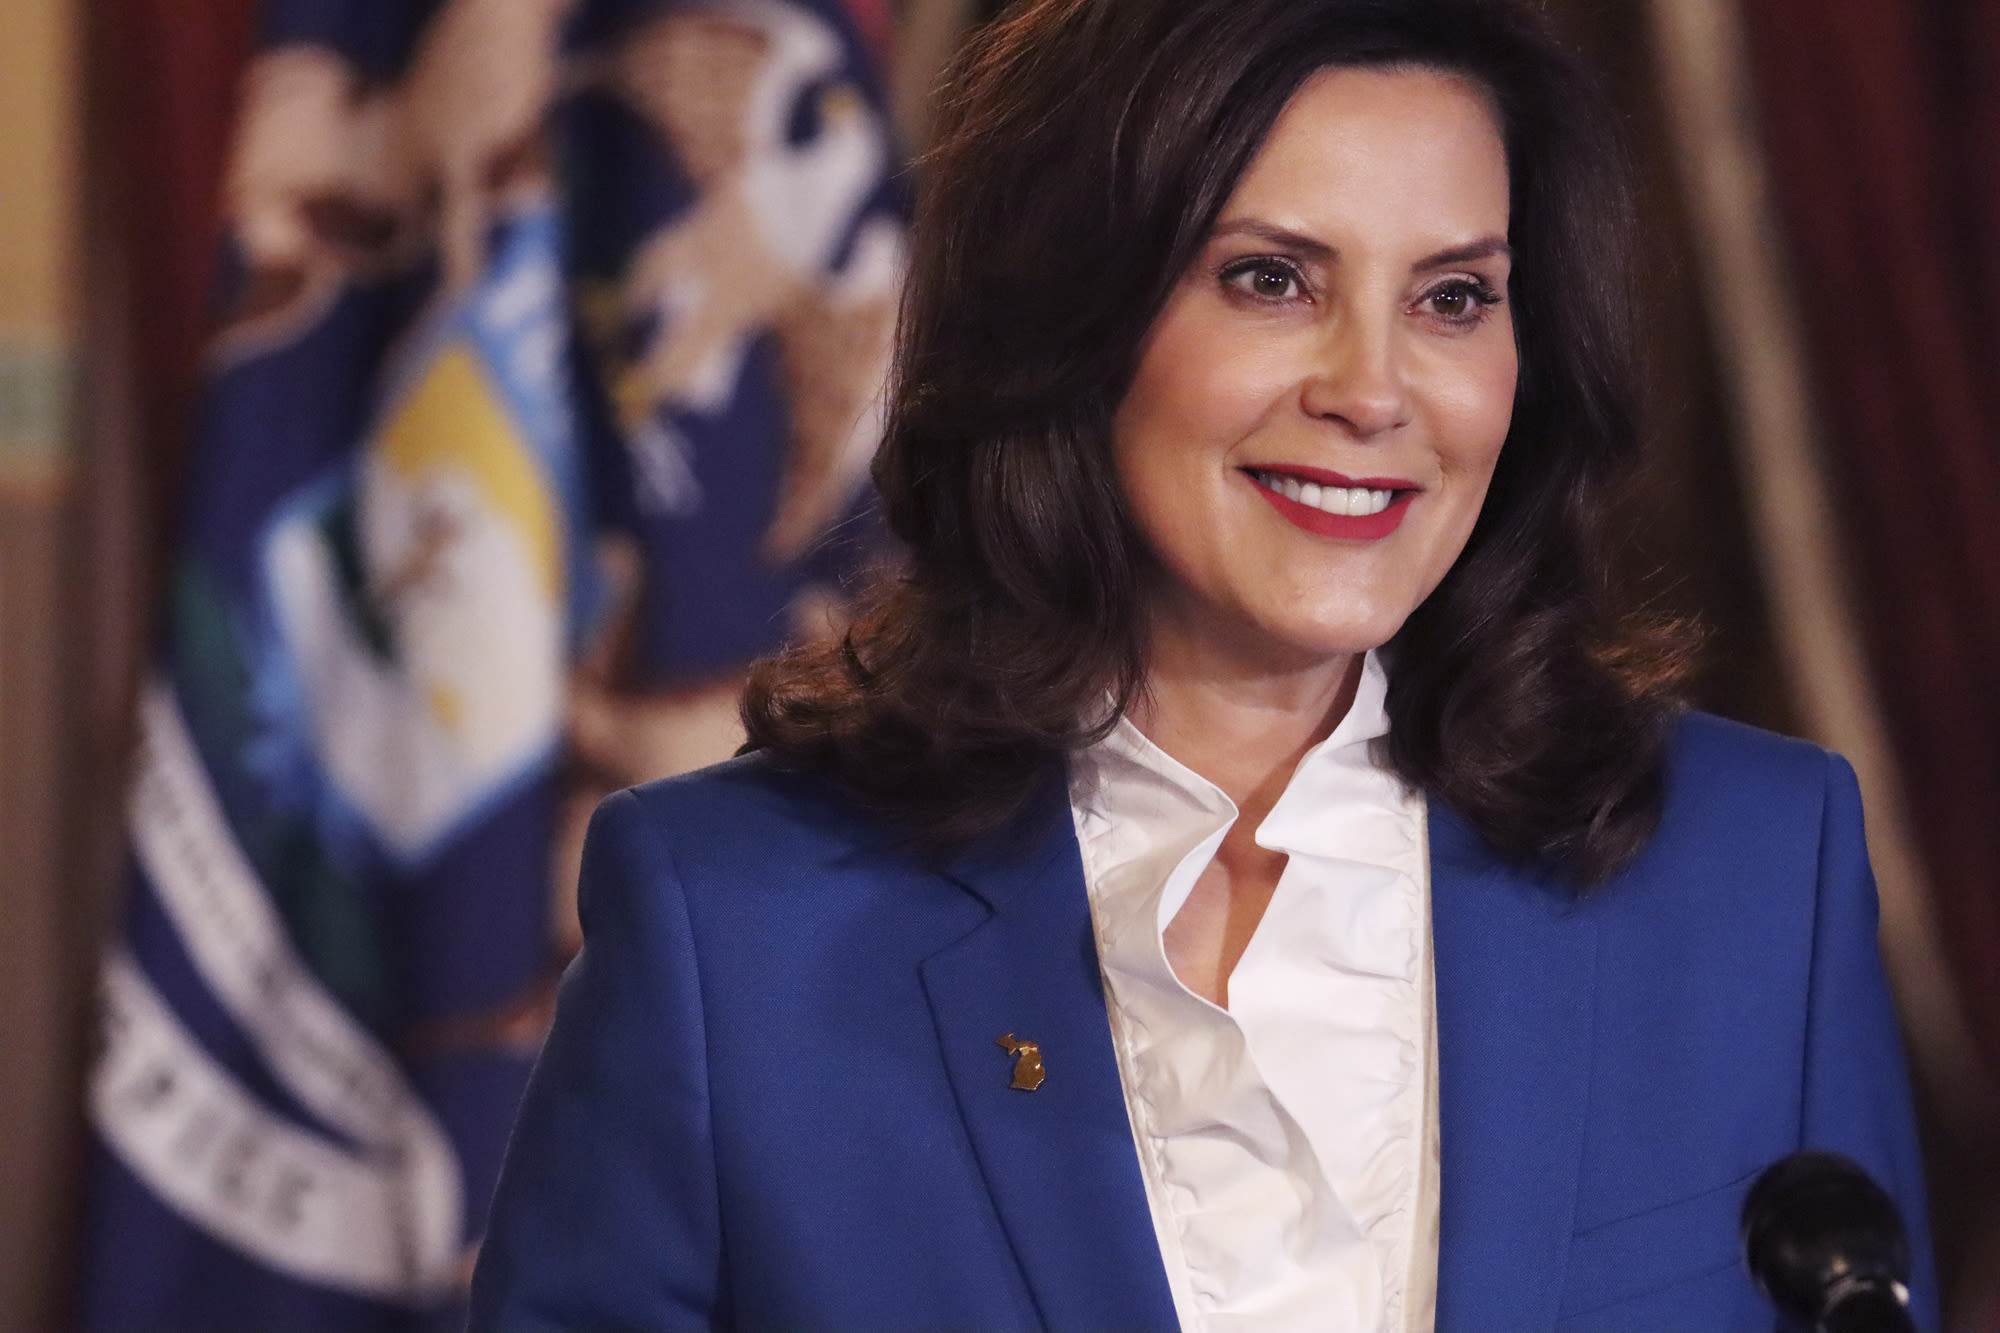 VIDEO: Governor Gretchen Whitmer addresses NAACP convention in Las Vegas